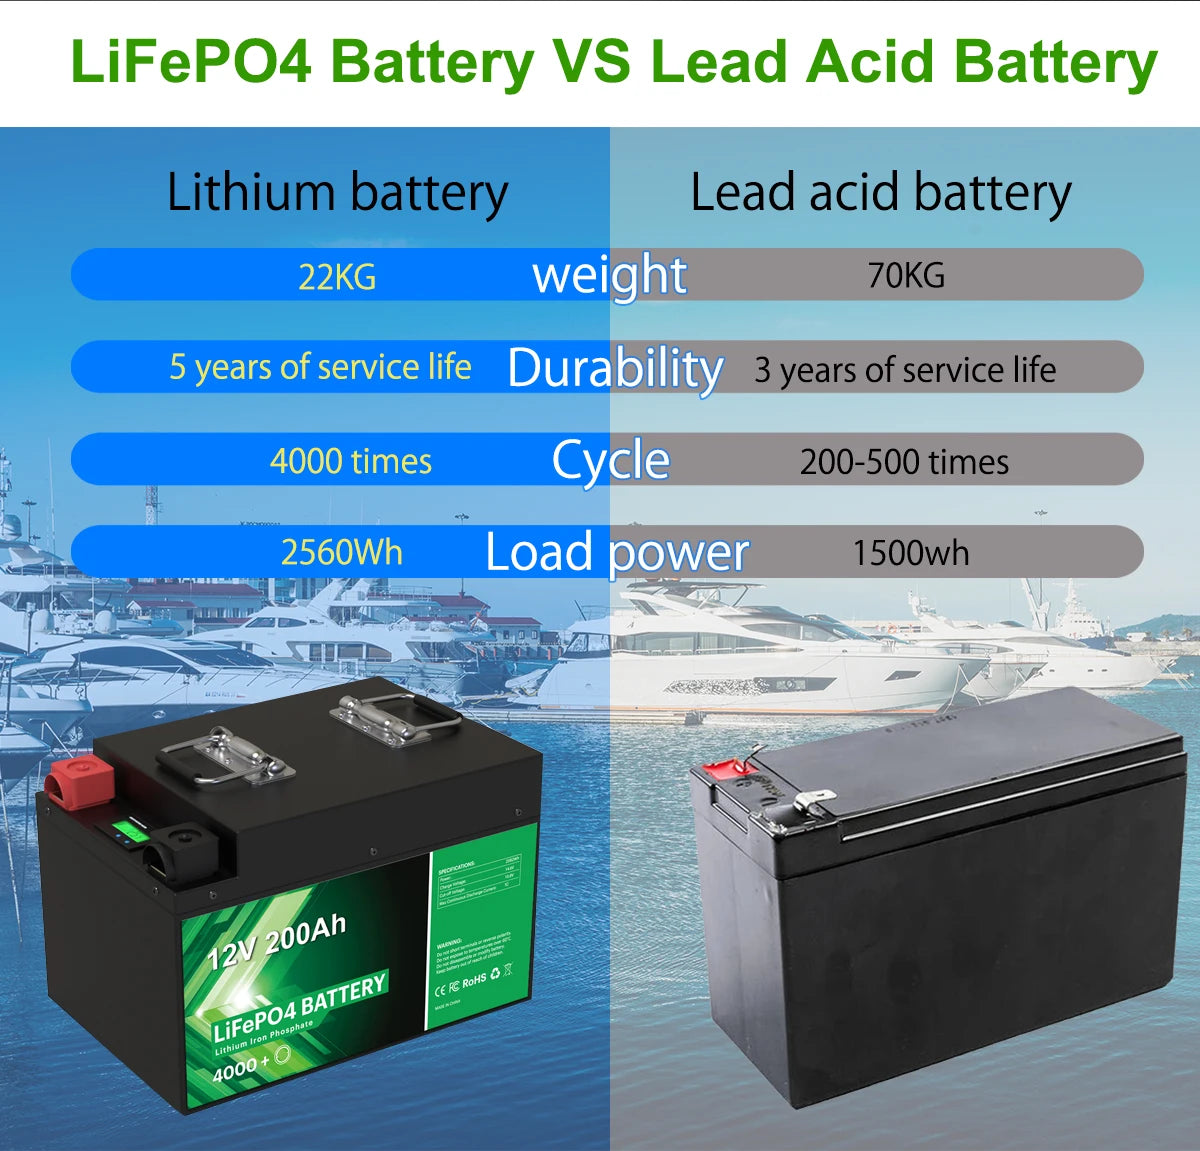 12V 200Ah LiFePO4 Battery, Long-lasting LiFePO4 battery pack with 5-year lifespan, high durability, and increased power and capacity.